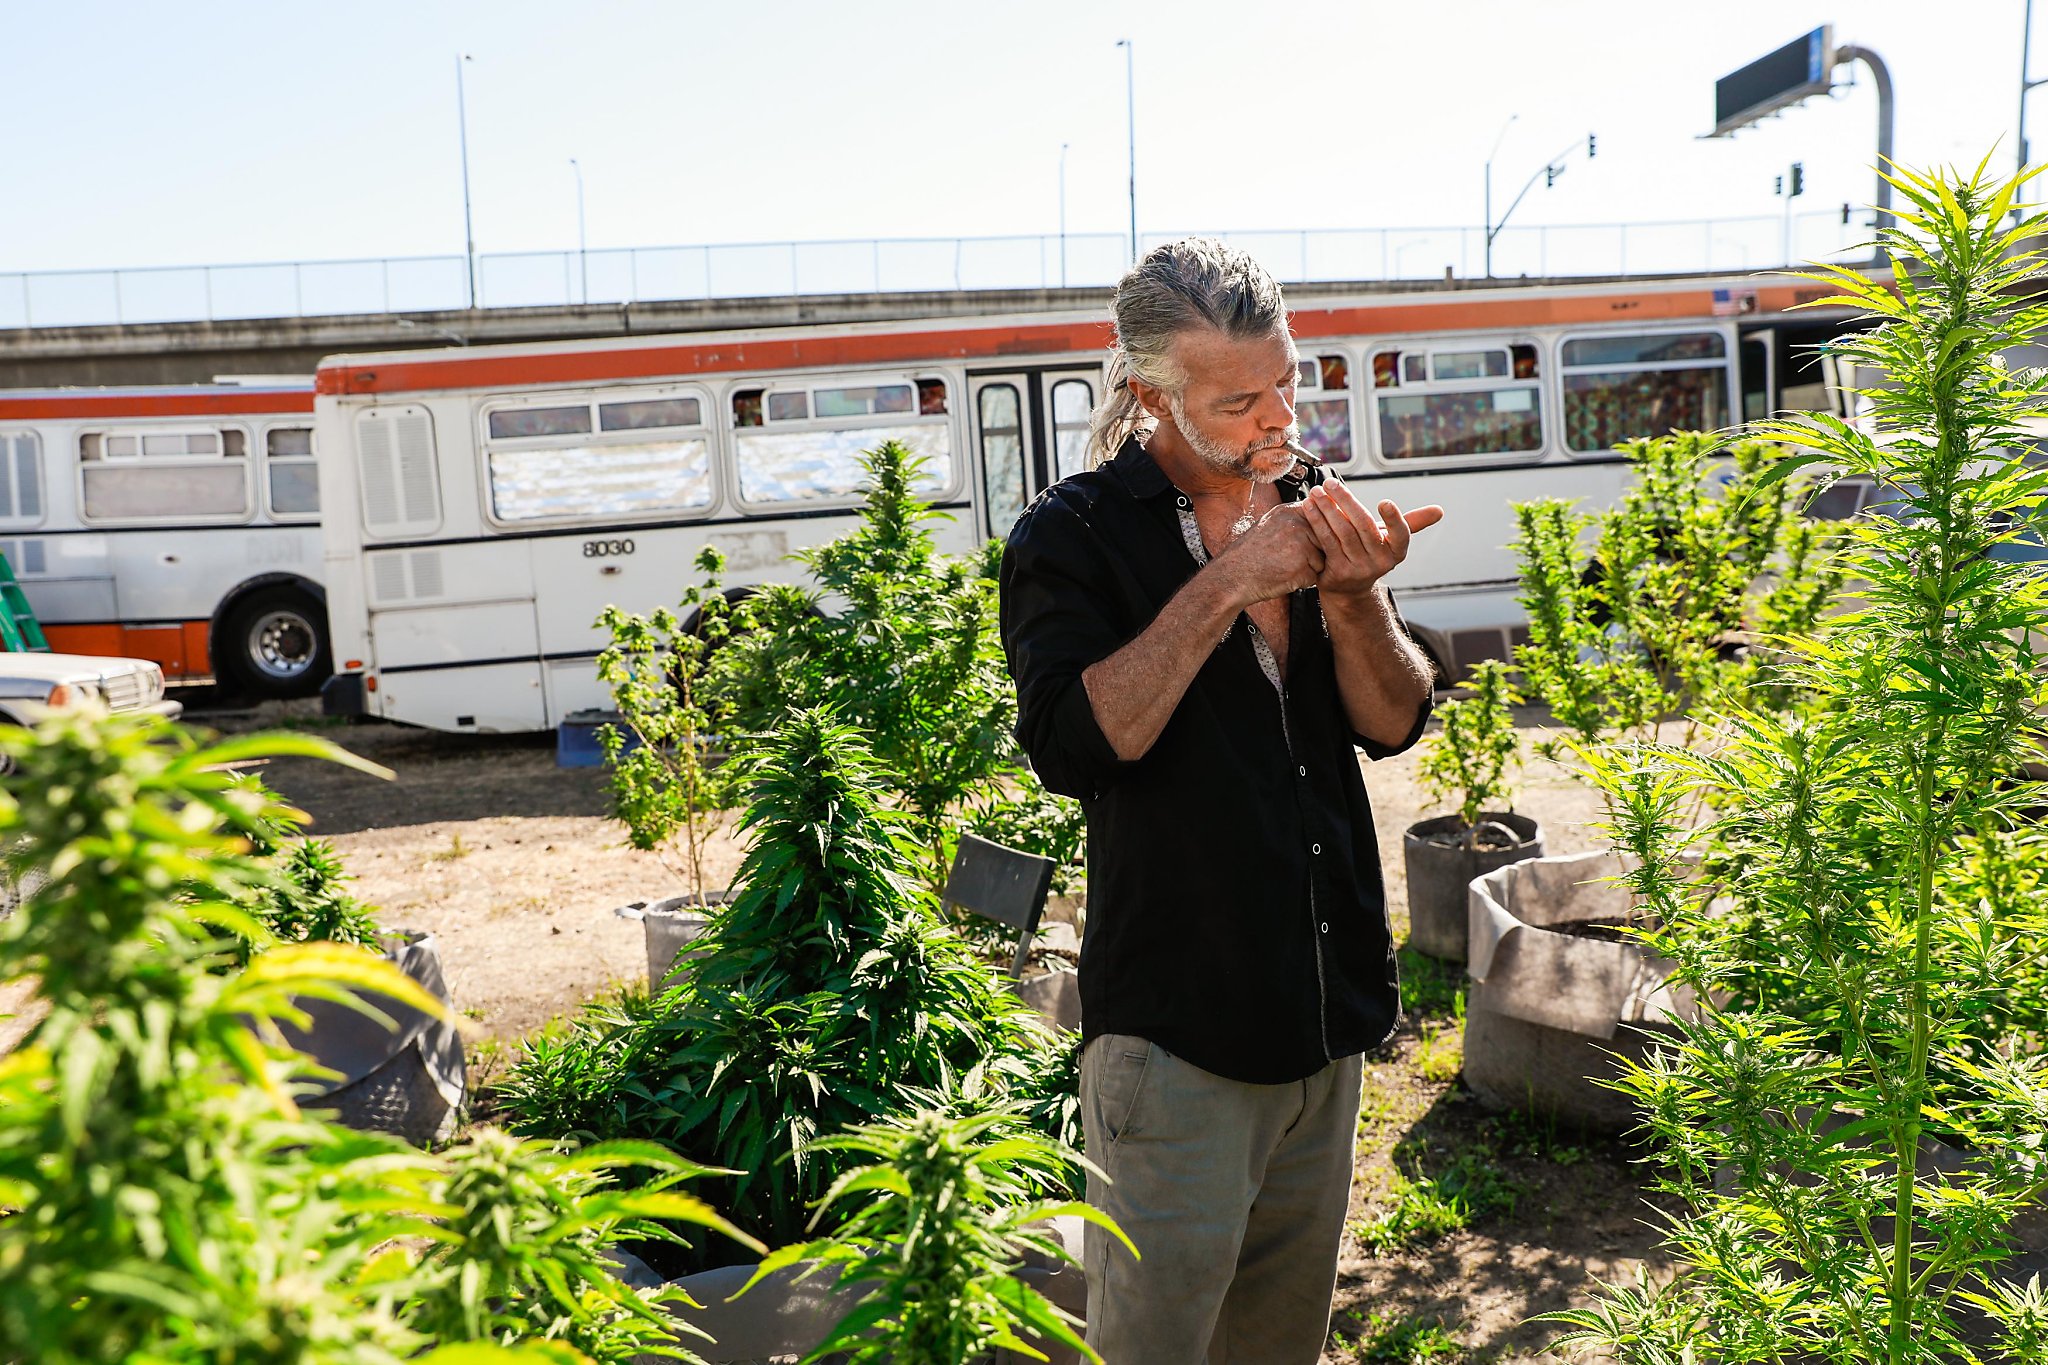 Oakland Says Big Pot Grow In Homeless Encampment Is Illegal But